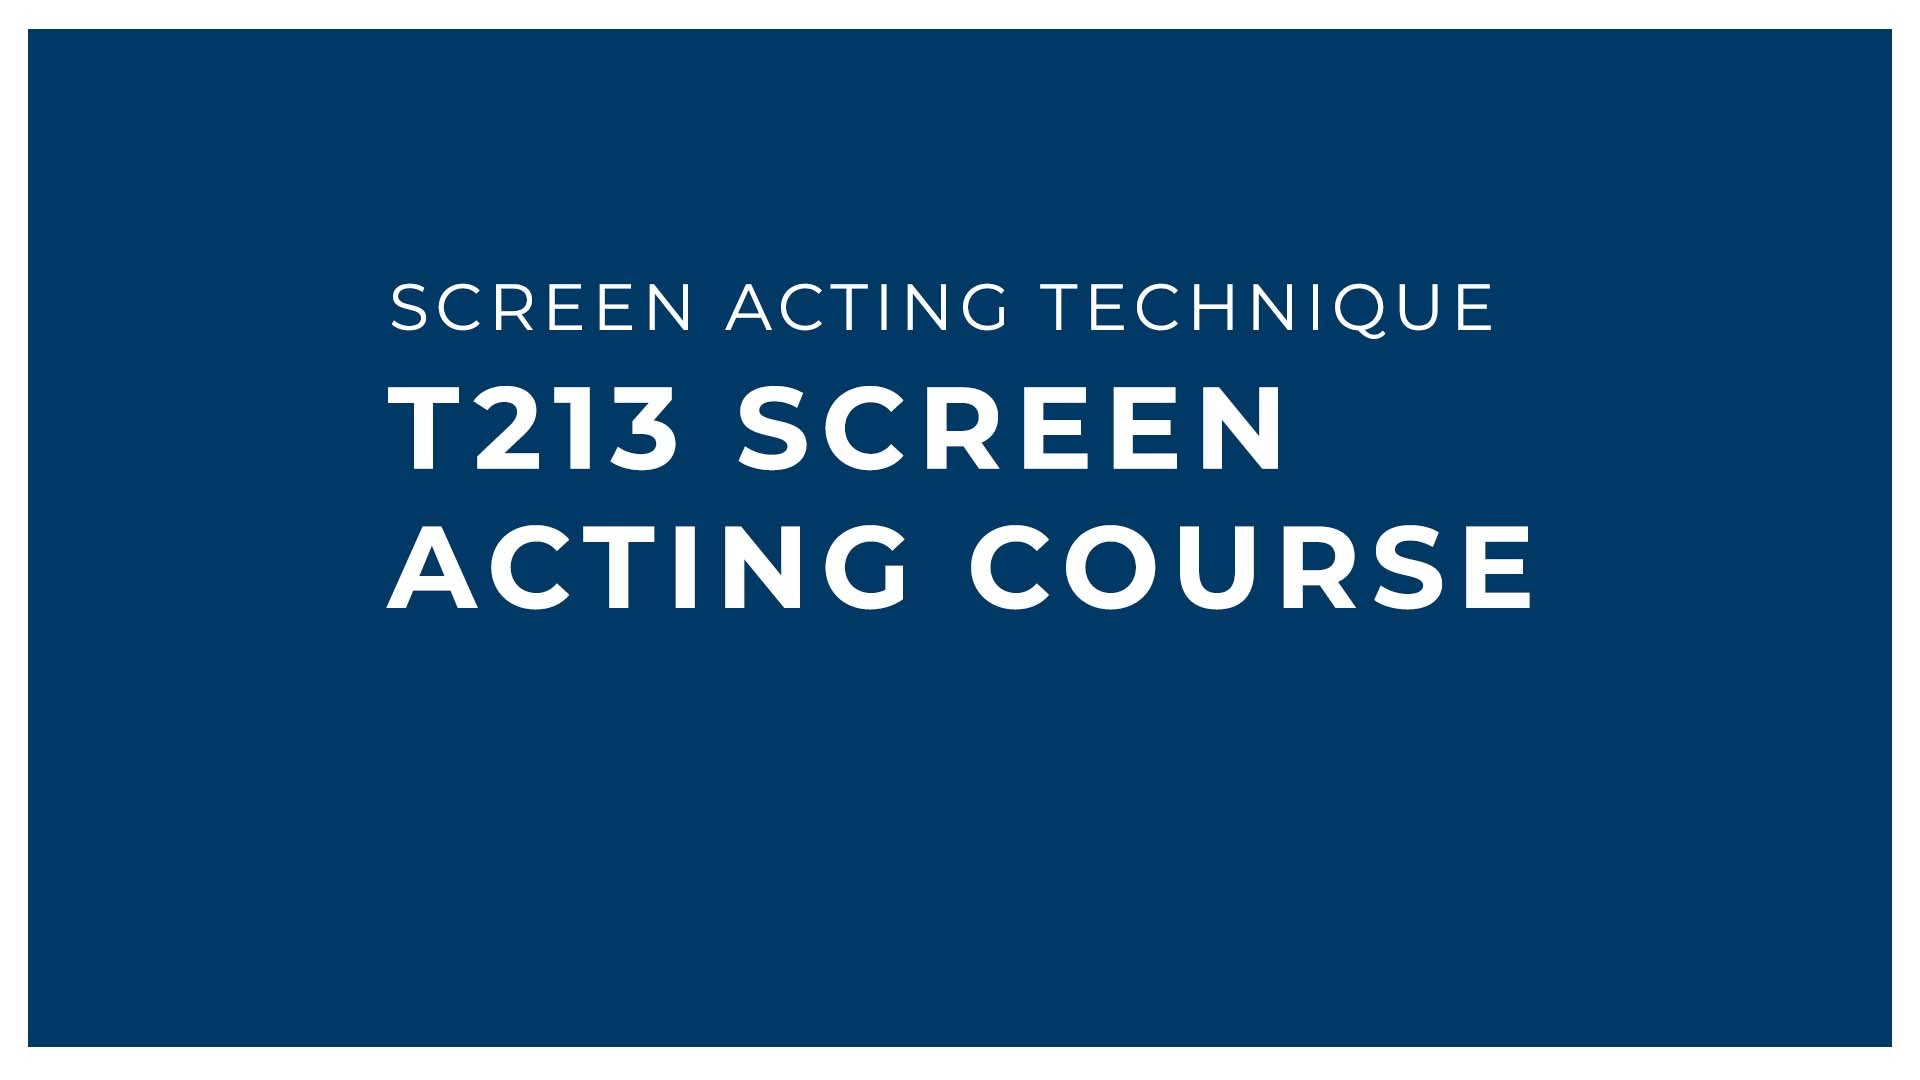 SCREEN ACTING COURSE: PERFECTING ON CAMERA PERFORMANCES